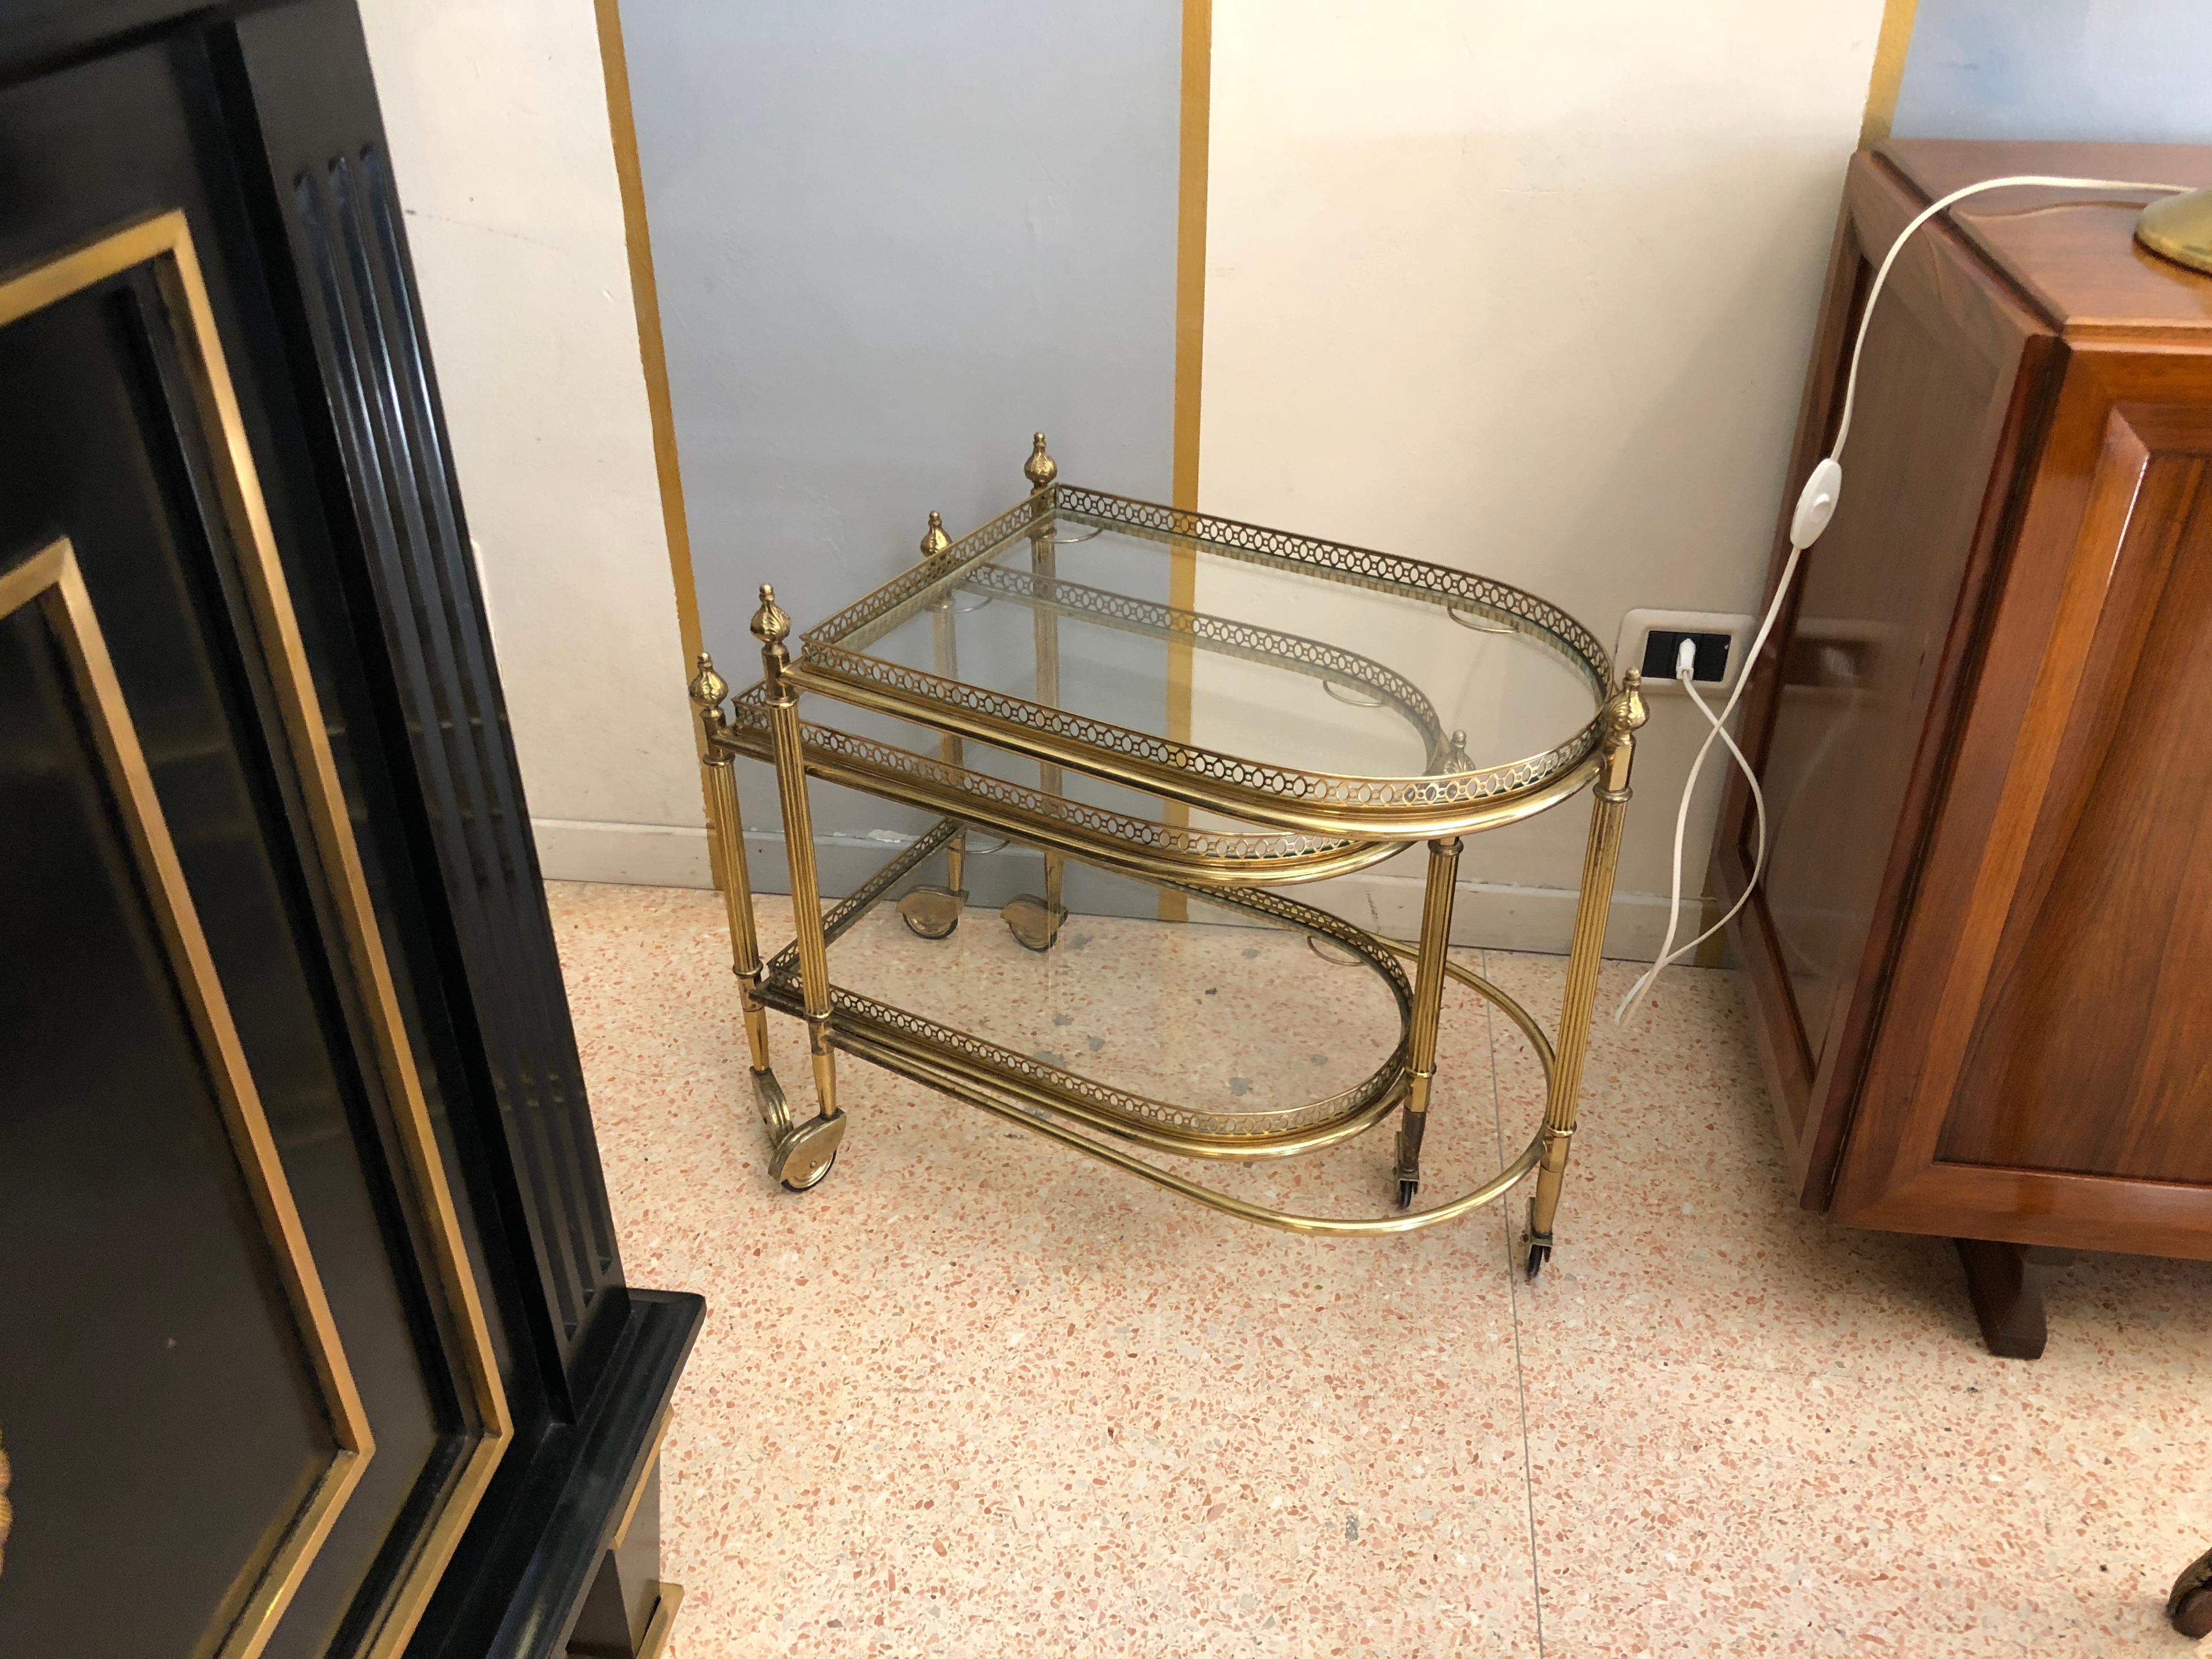 A tray composed by two pieces which can be easily moved thanks to the wheels. The structure is made of brass while the shelves are made of crystal.
The smaller tray has two shelves while the bigger one has only the top layer to allow the smaller to